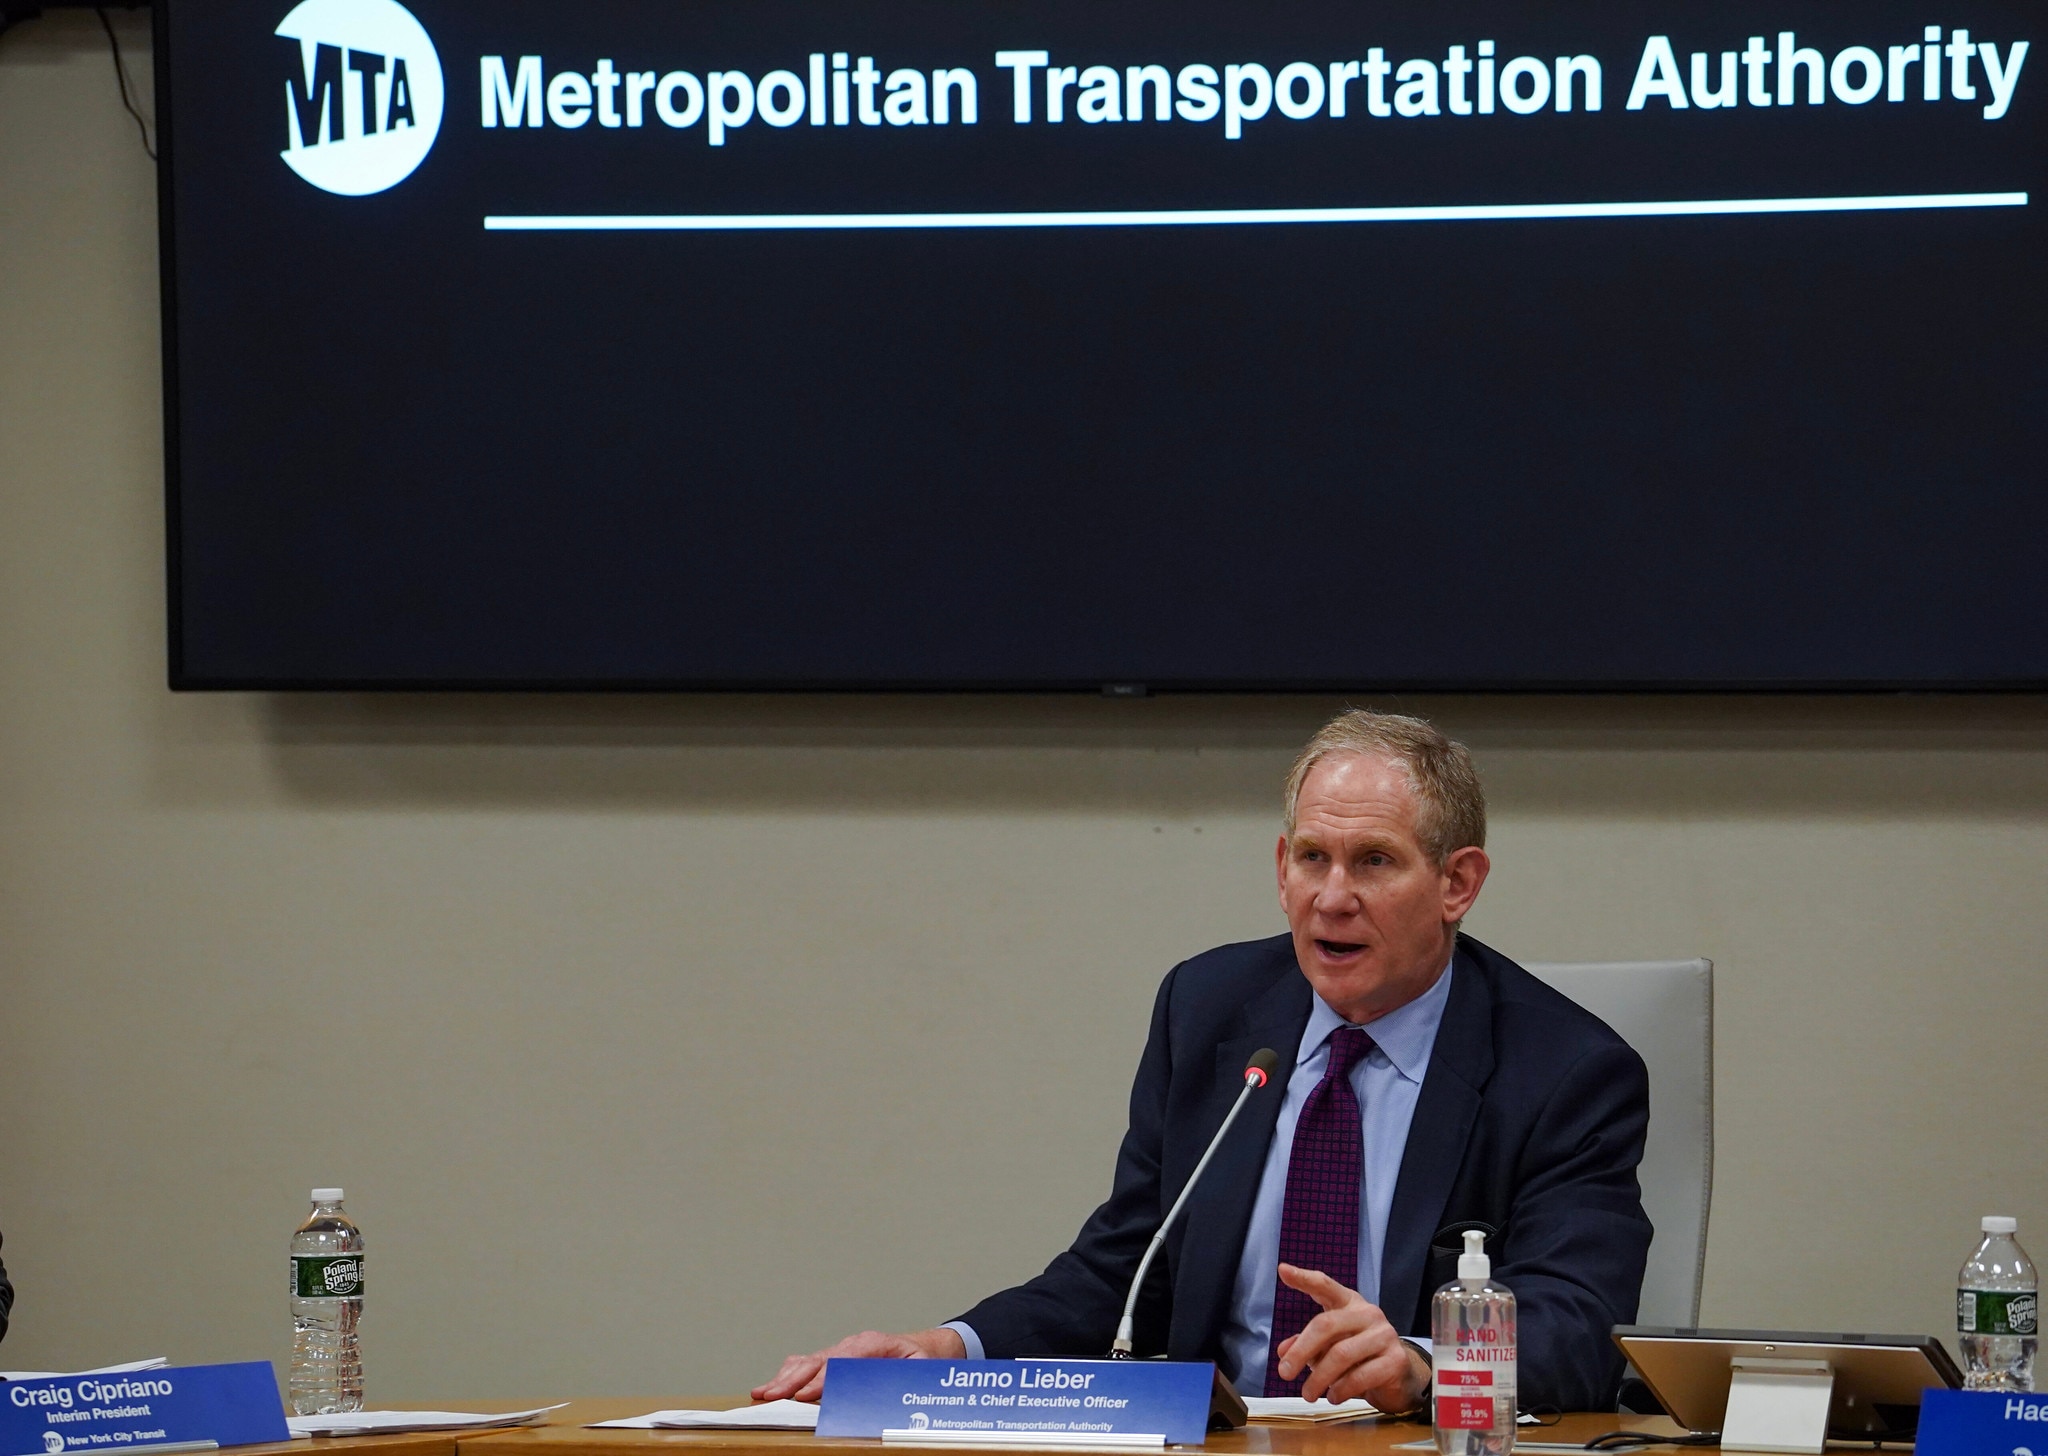 TRANSCRIPT: MTA Chair and CEO Lieber Appears on Up Close with Bill Ritter